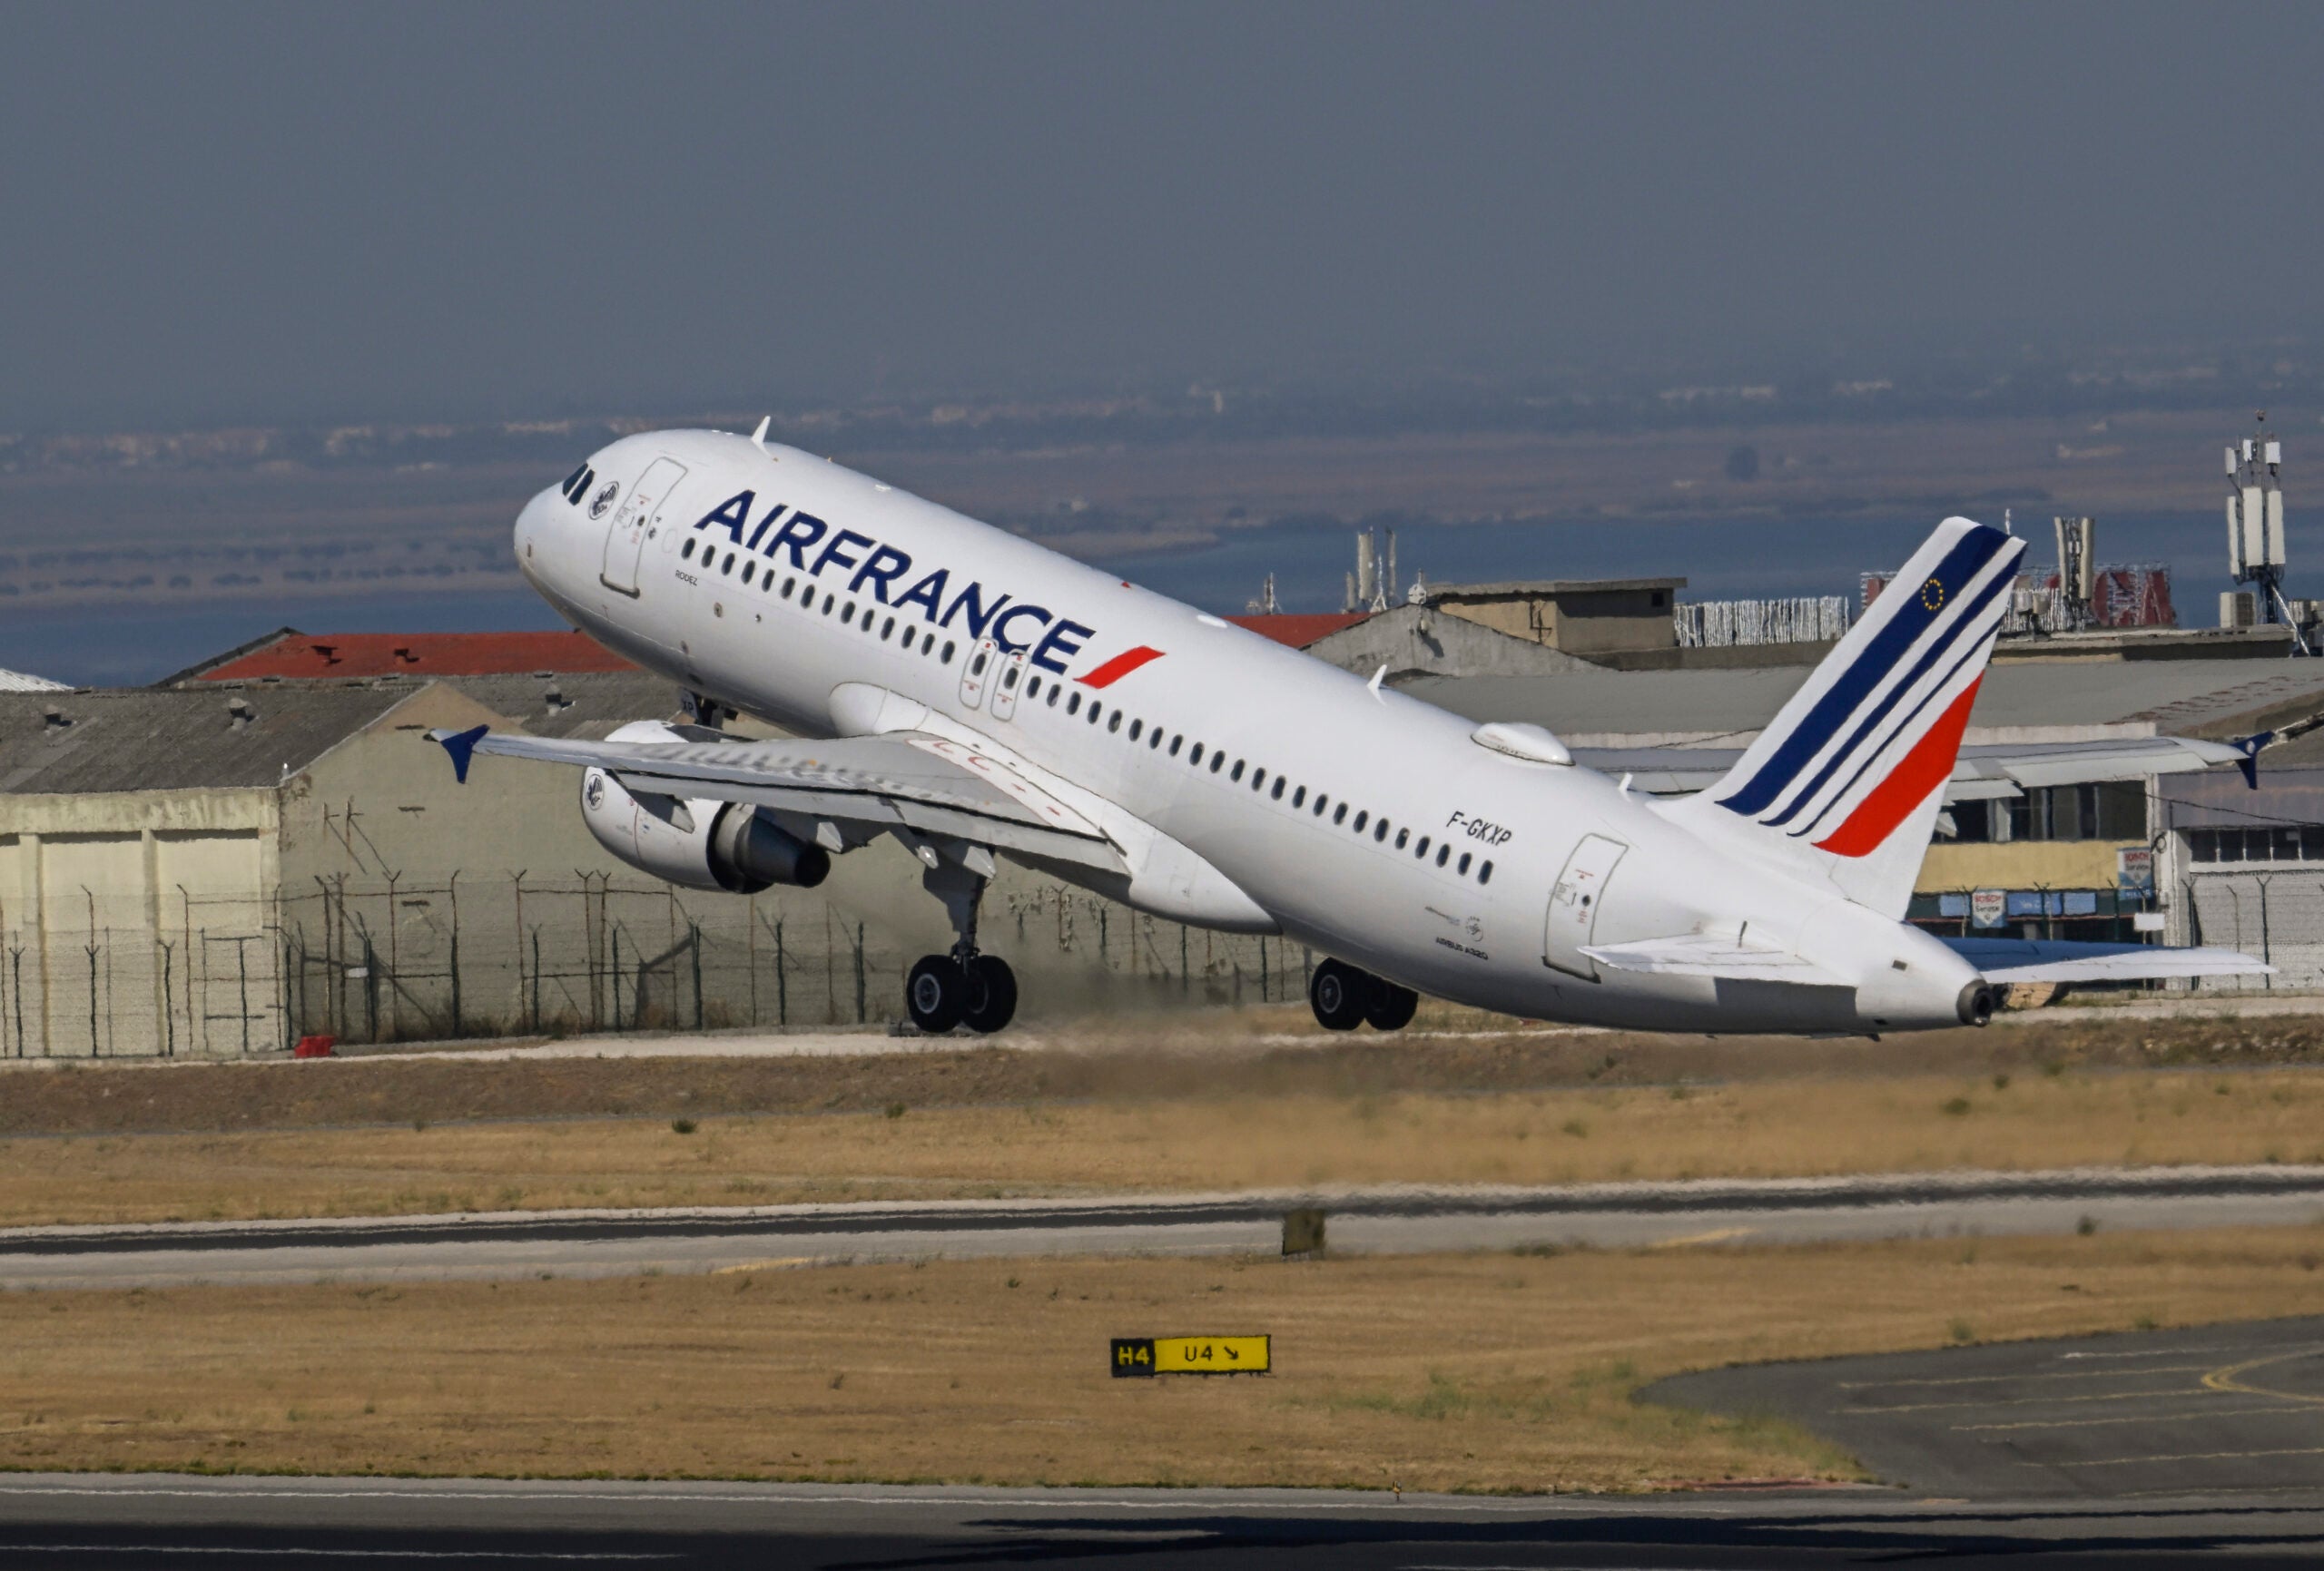 Air France plane taking off from Lisbon airport